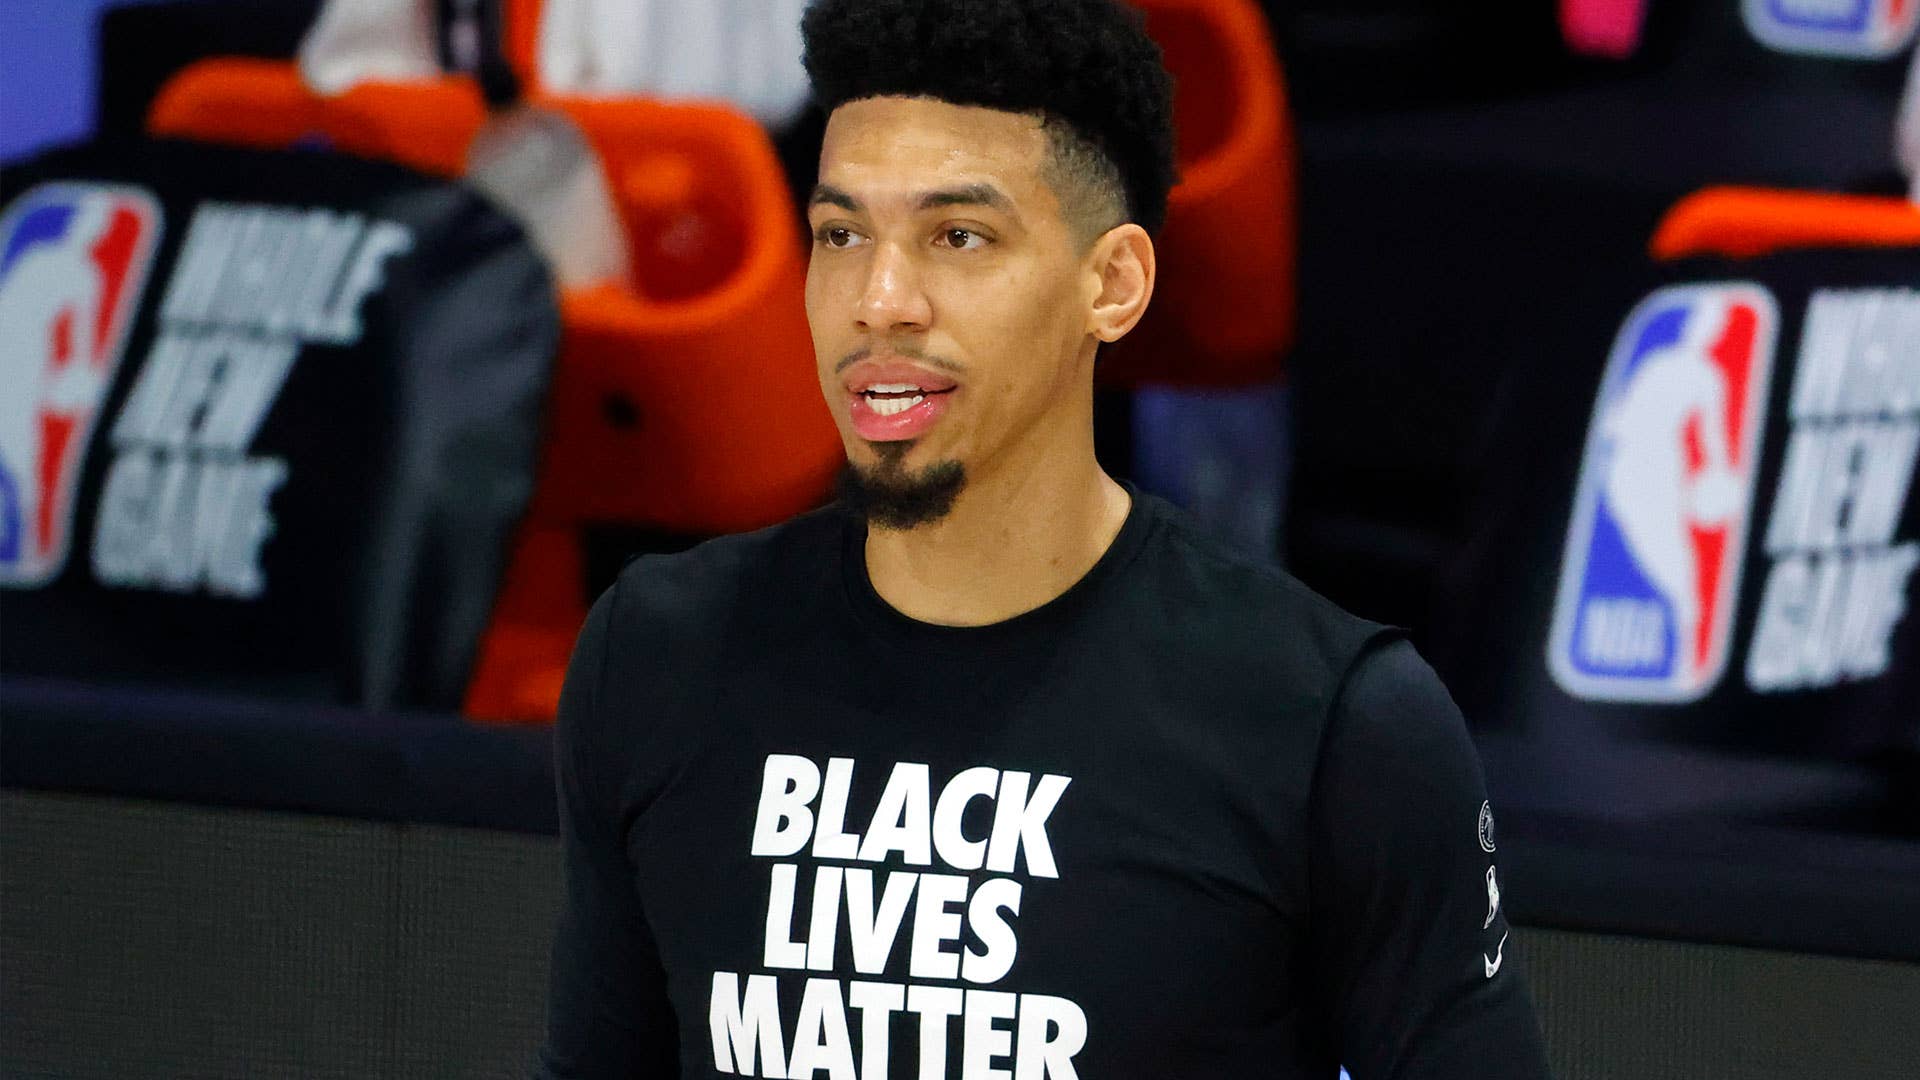 Danny Green on Joining Toronto Raptors & His New Deal With Puma